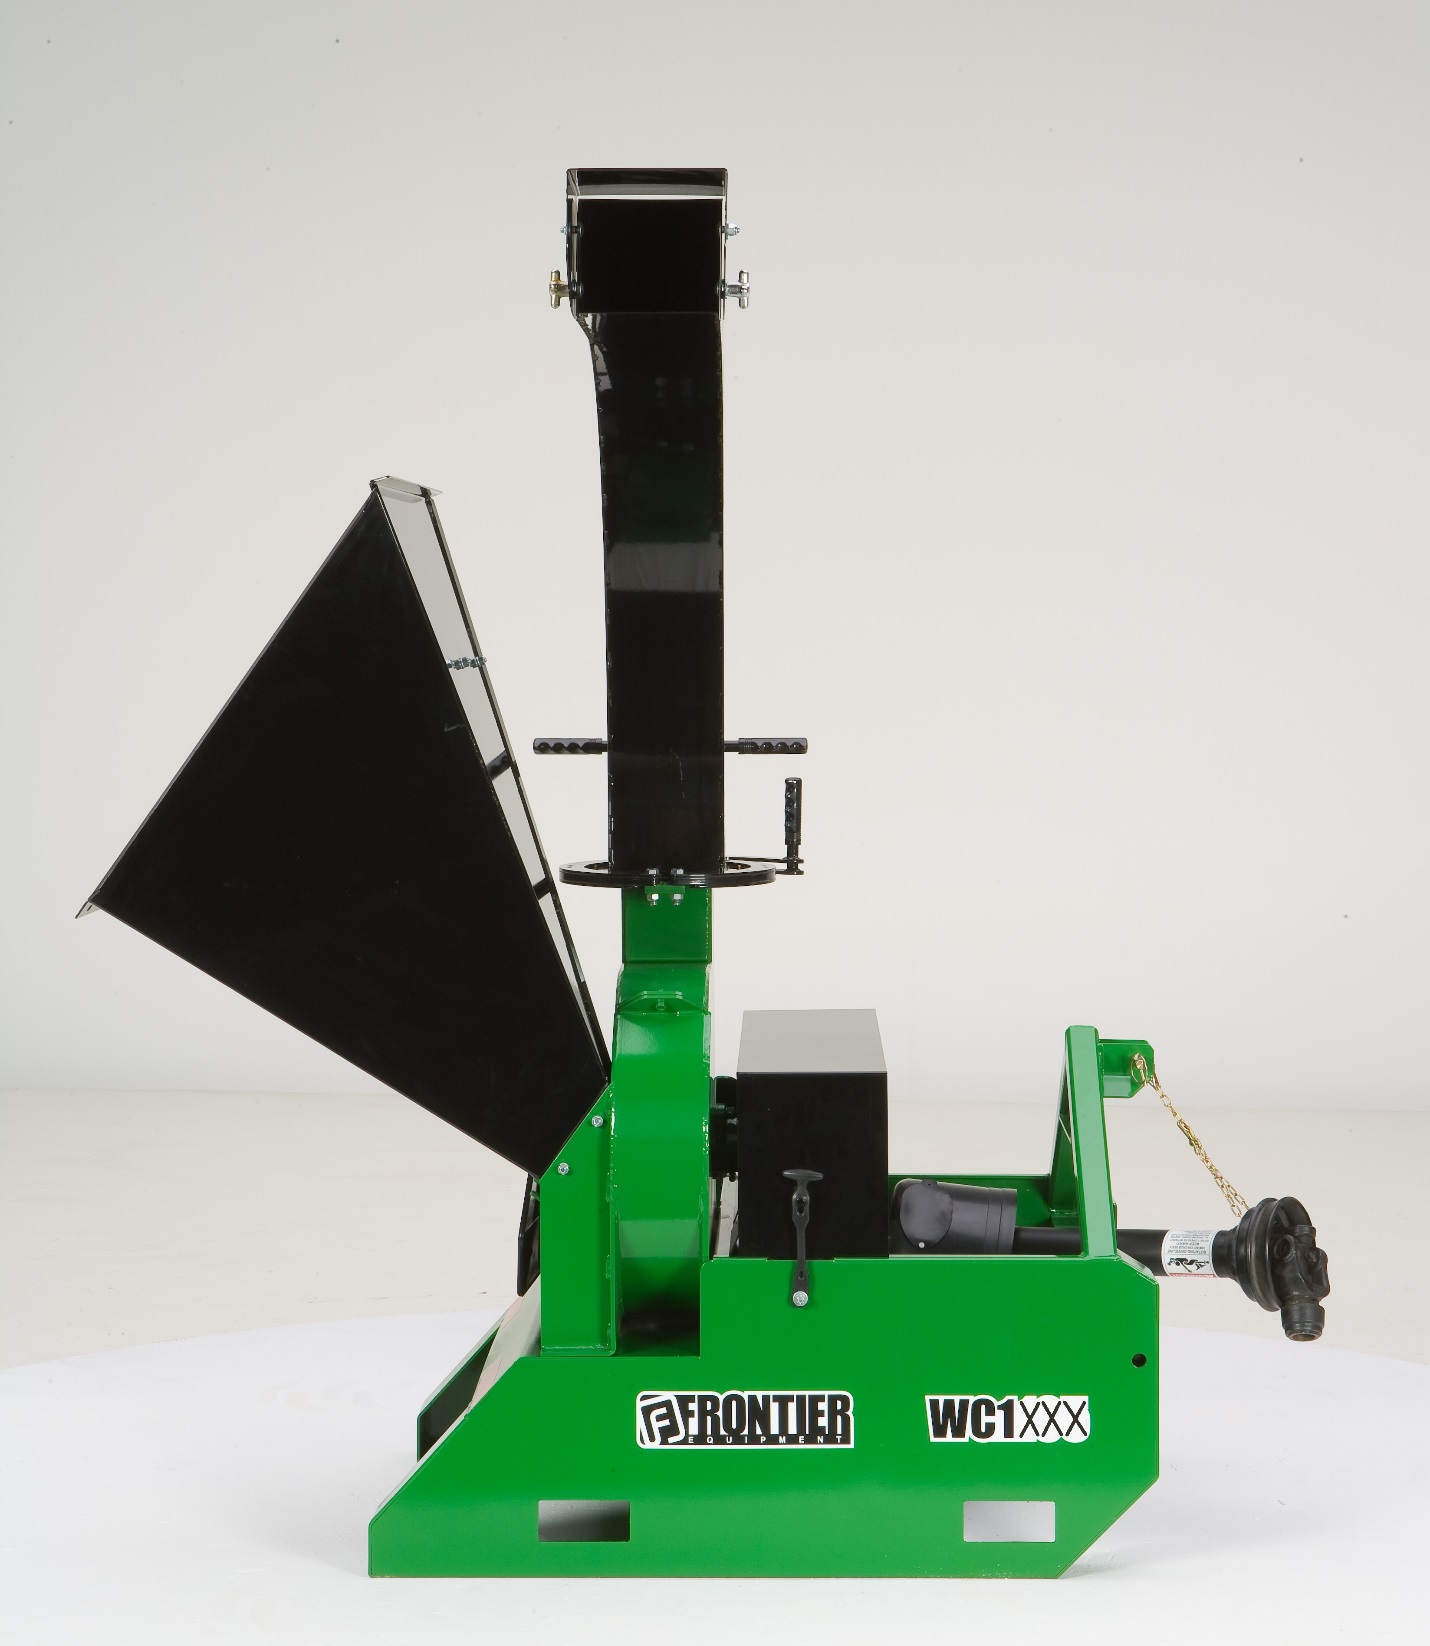 Frontier wood chippers